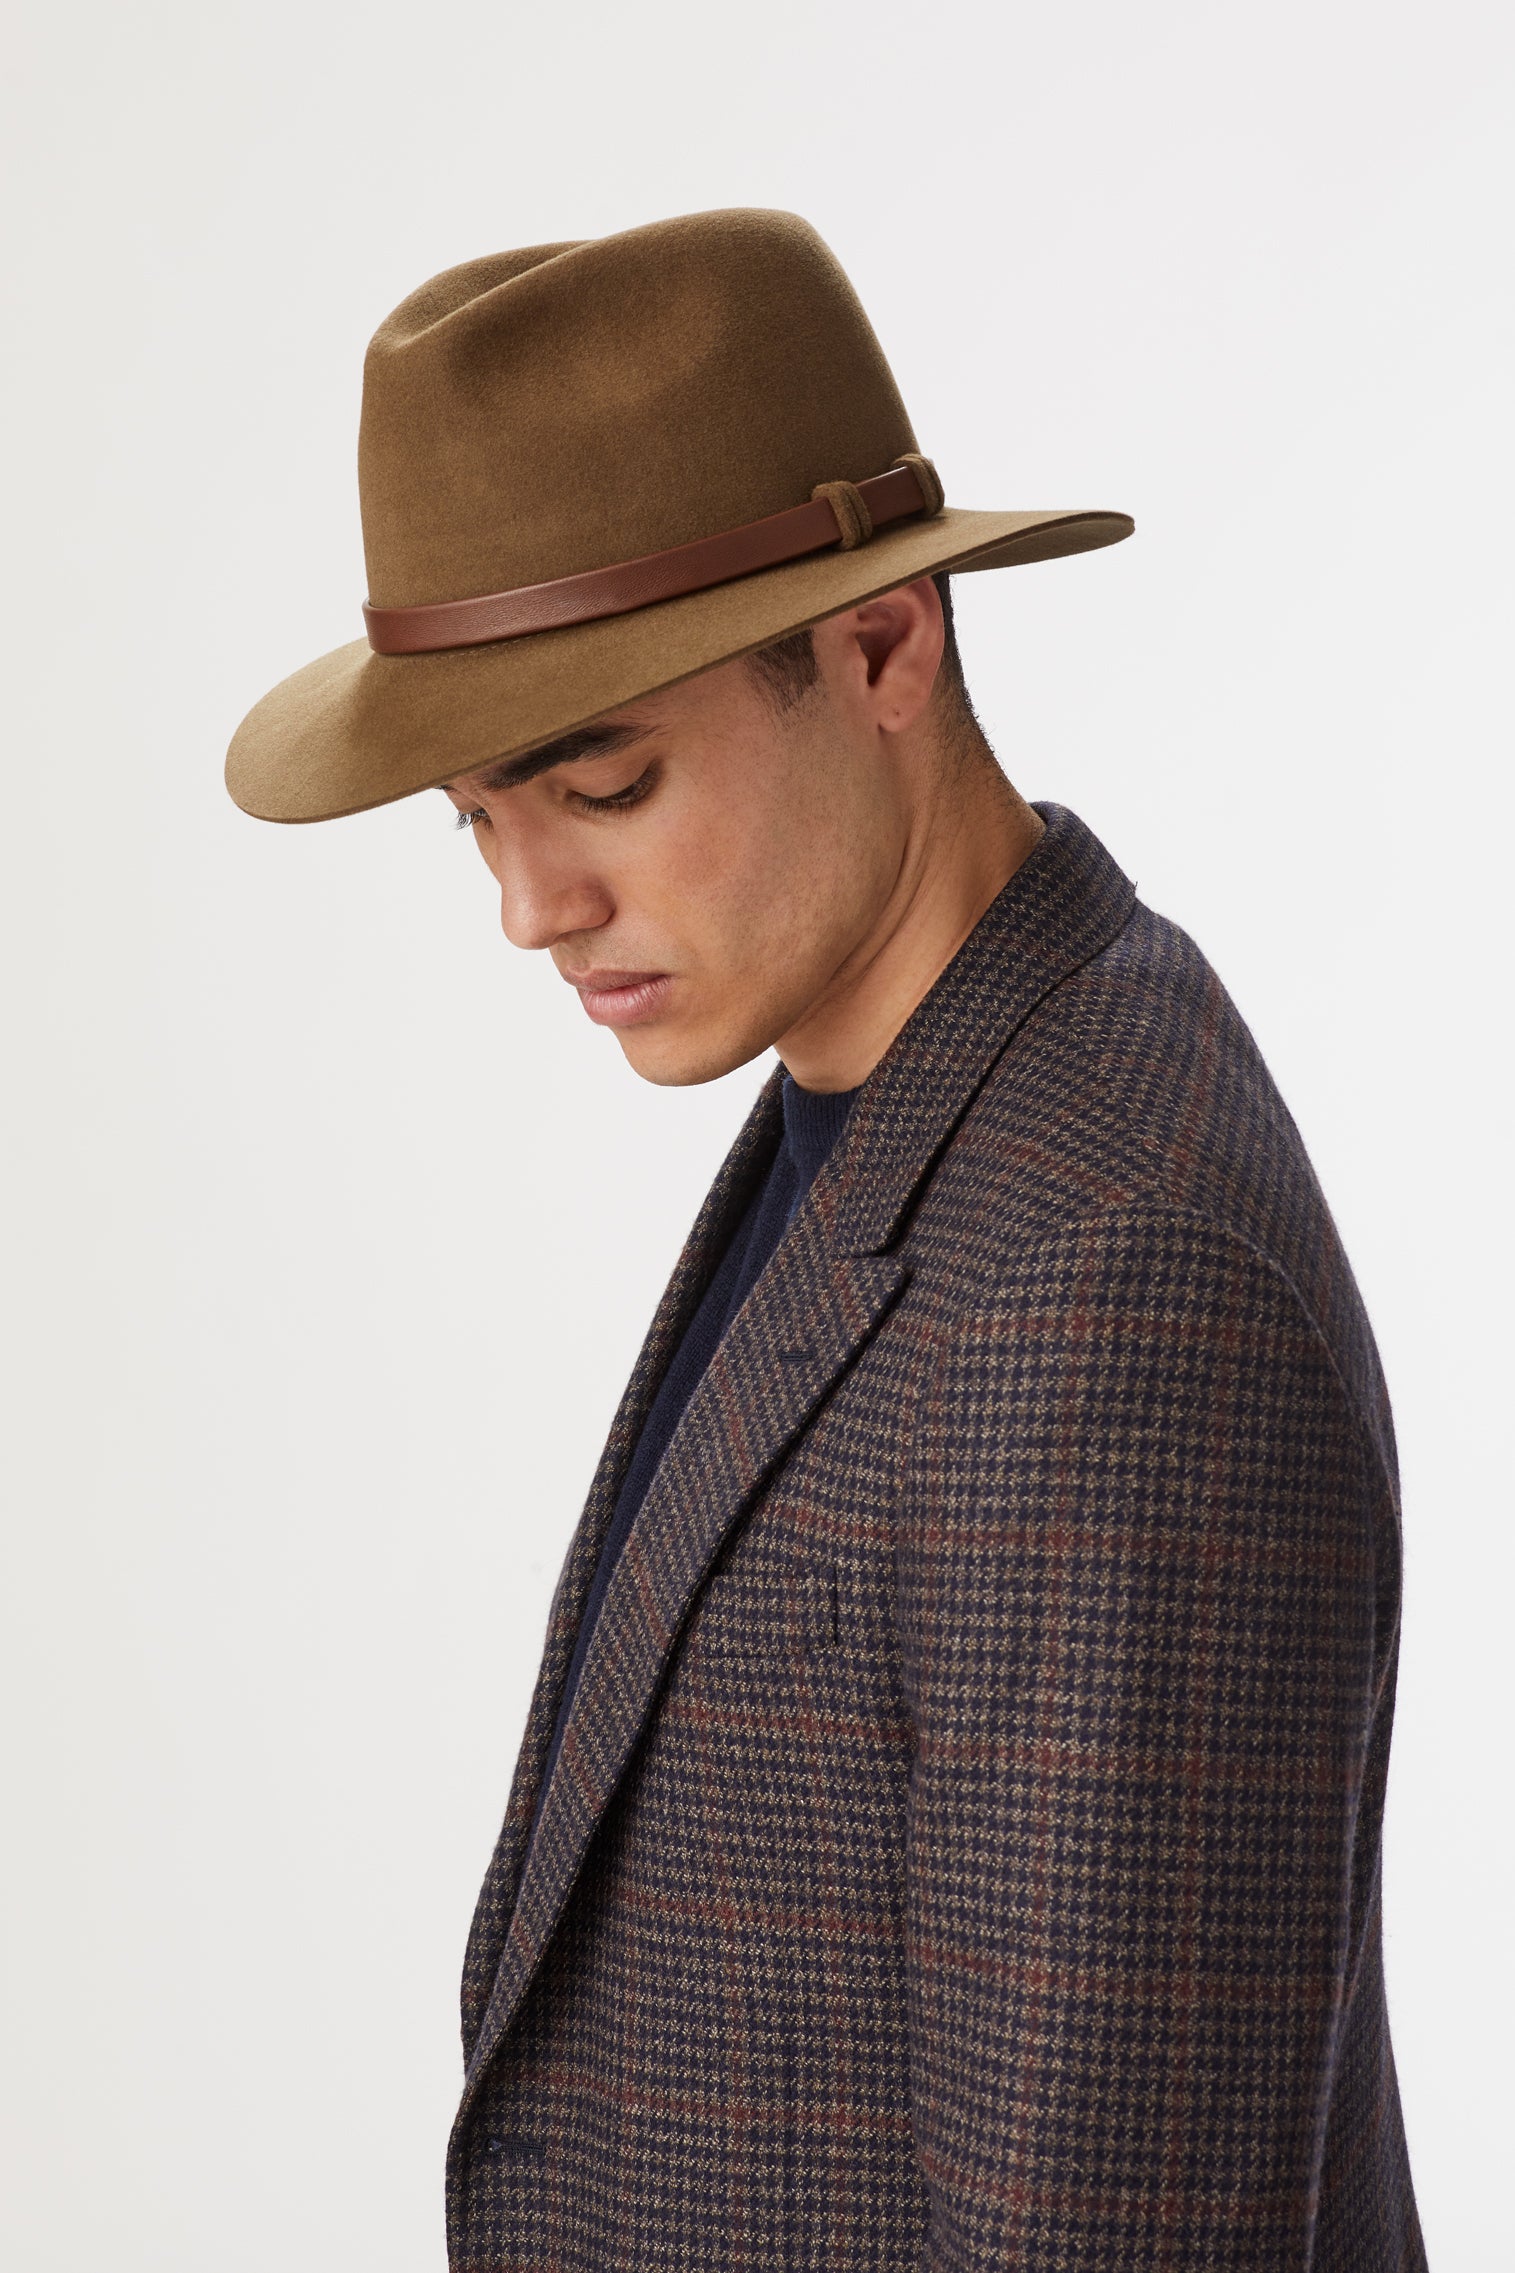 OLIVE BROWN FELT TRILBY WITH A BROWN LEATHER BAND